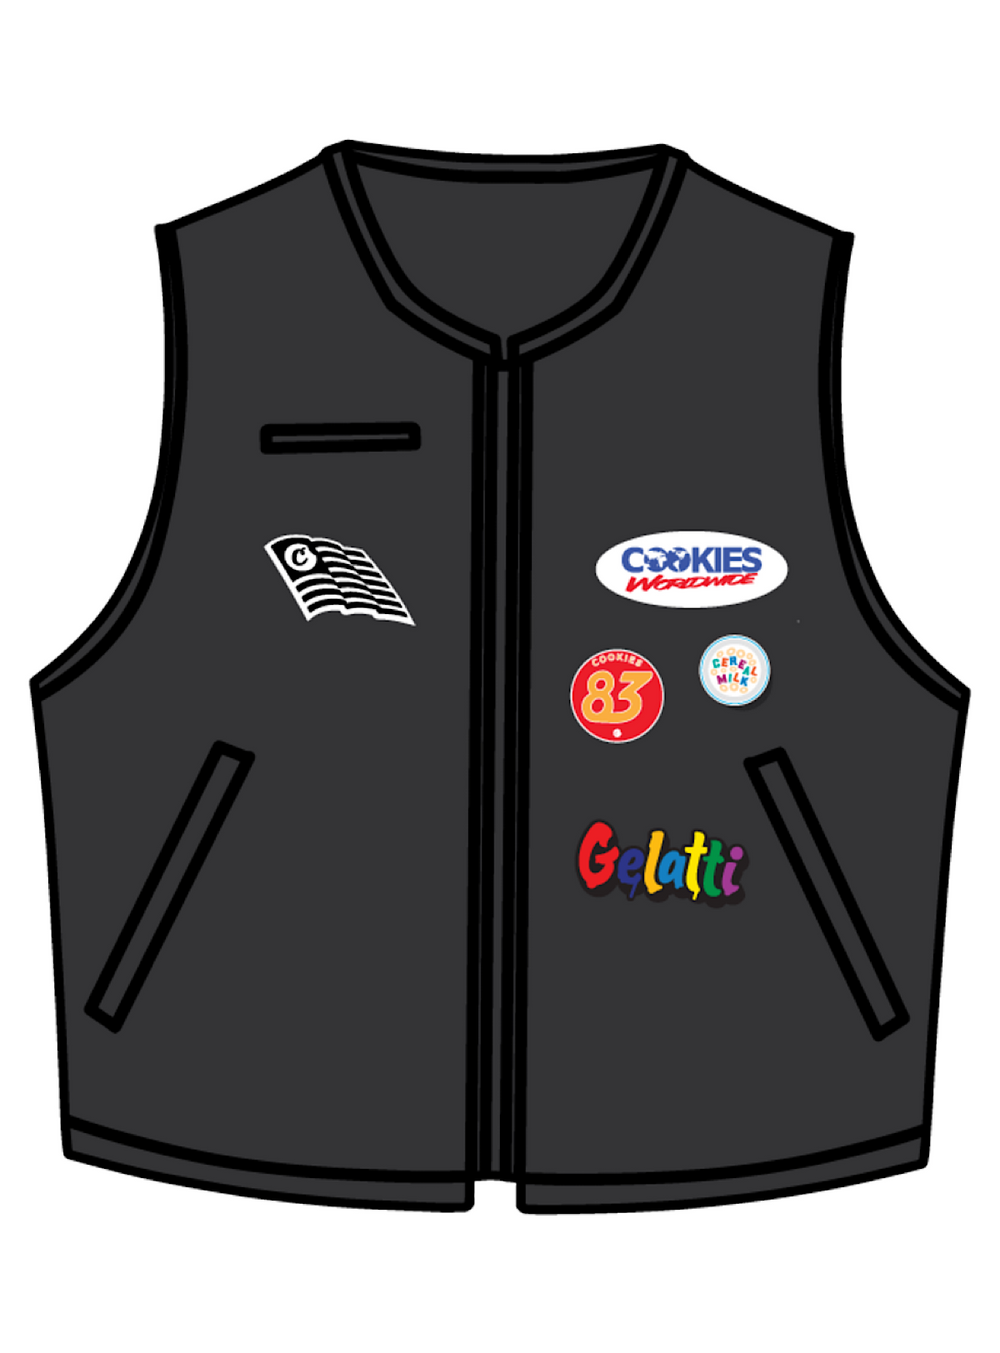 Cookies Enzo Vegan Leather Vest With Embroidery & Patch Artwork